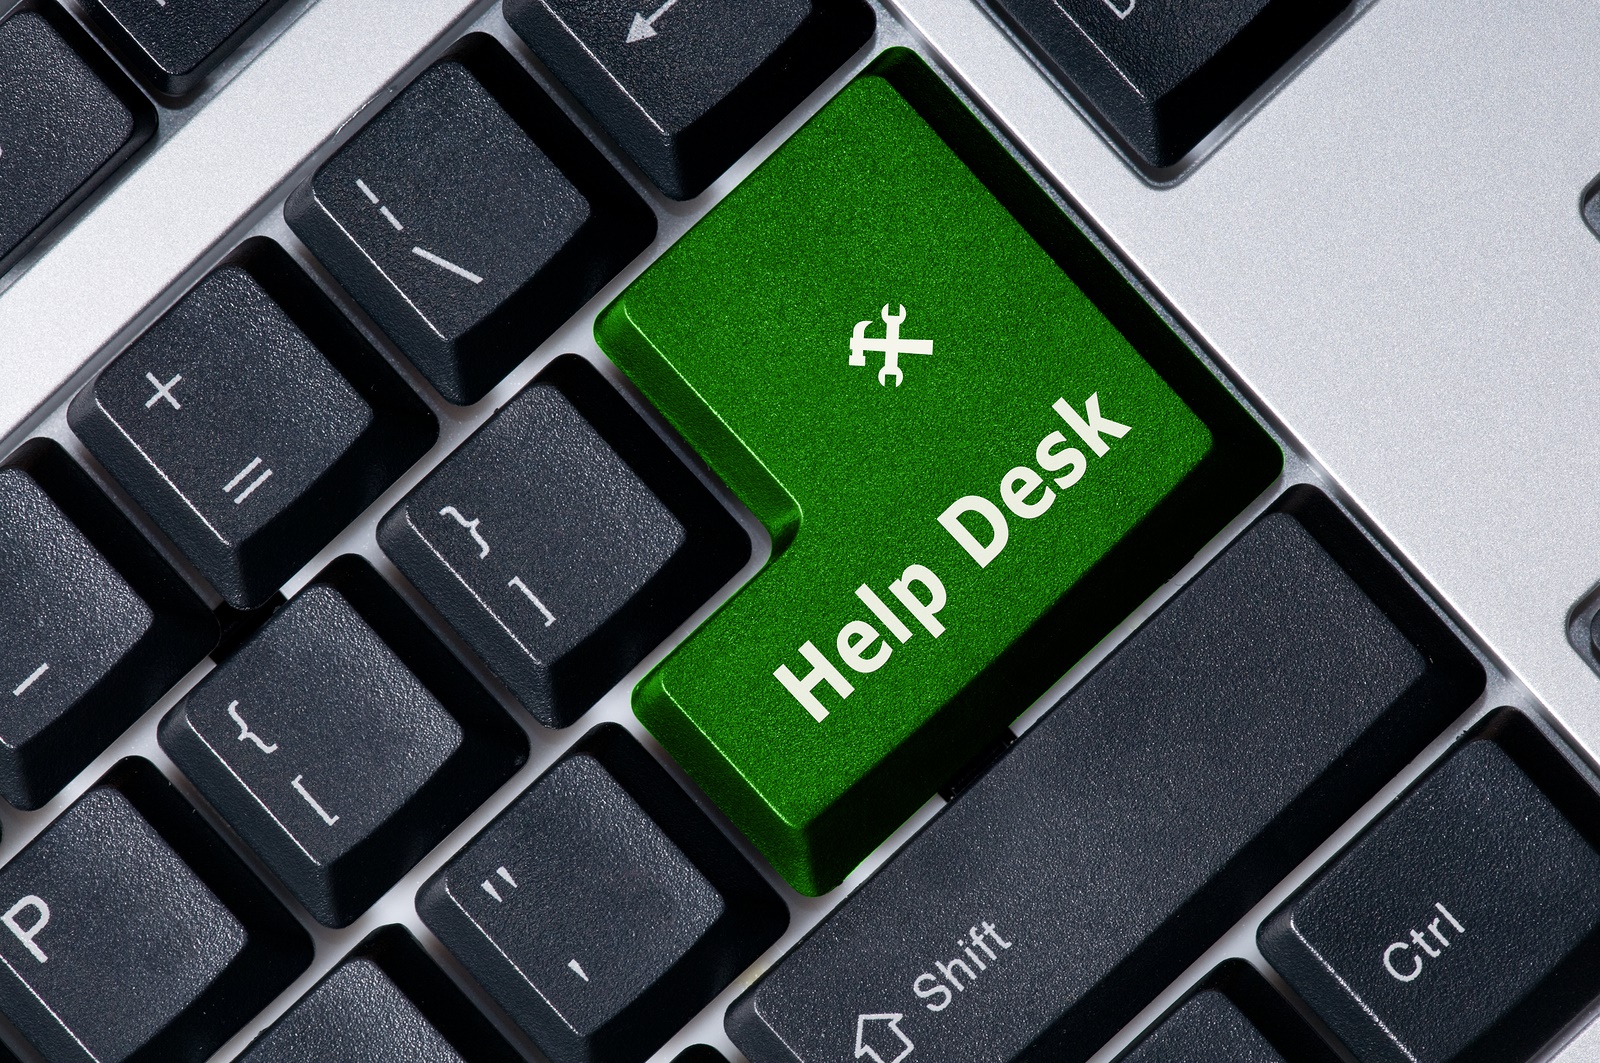 5 Things that Business owners look for in a helpdesk